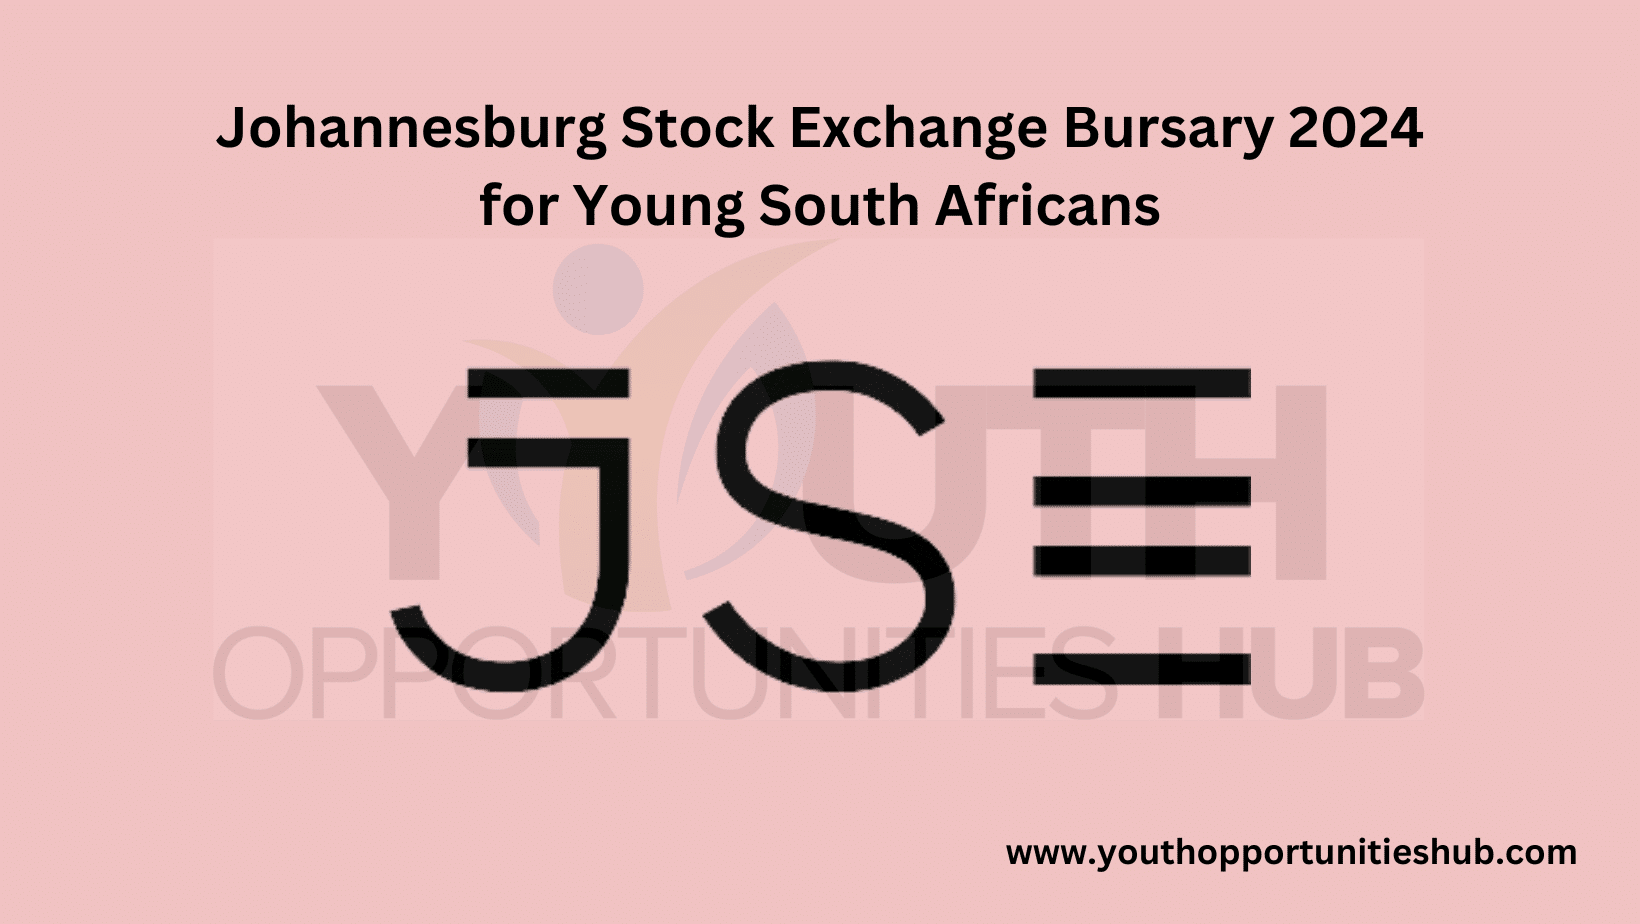 Johannesburg Stock Exchange Bursary 2024 for Young South Africans